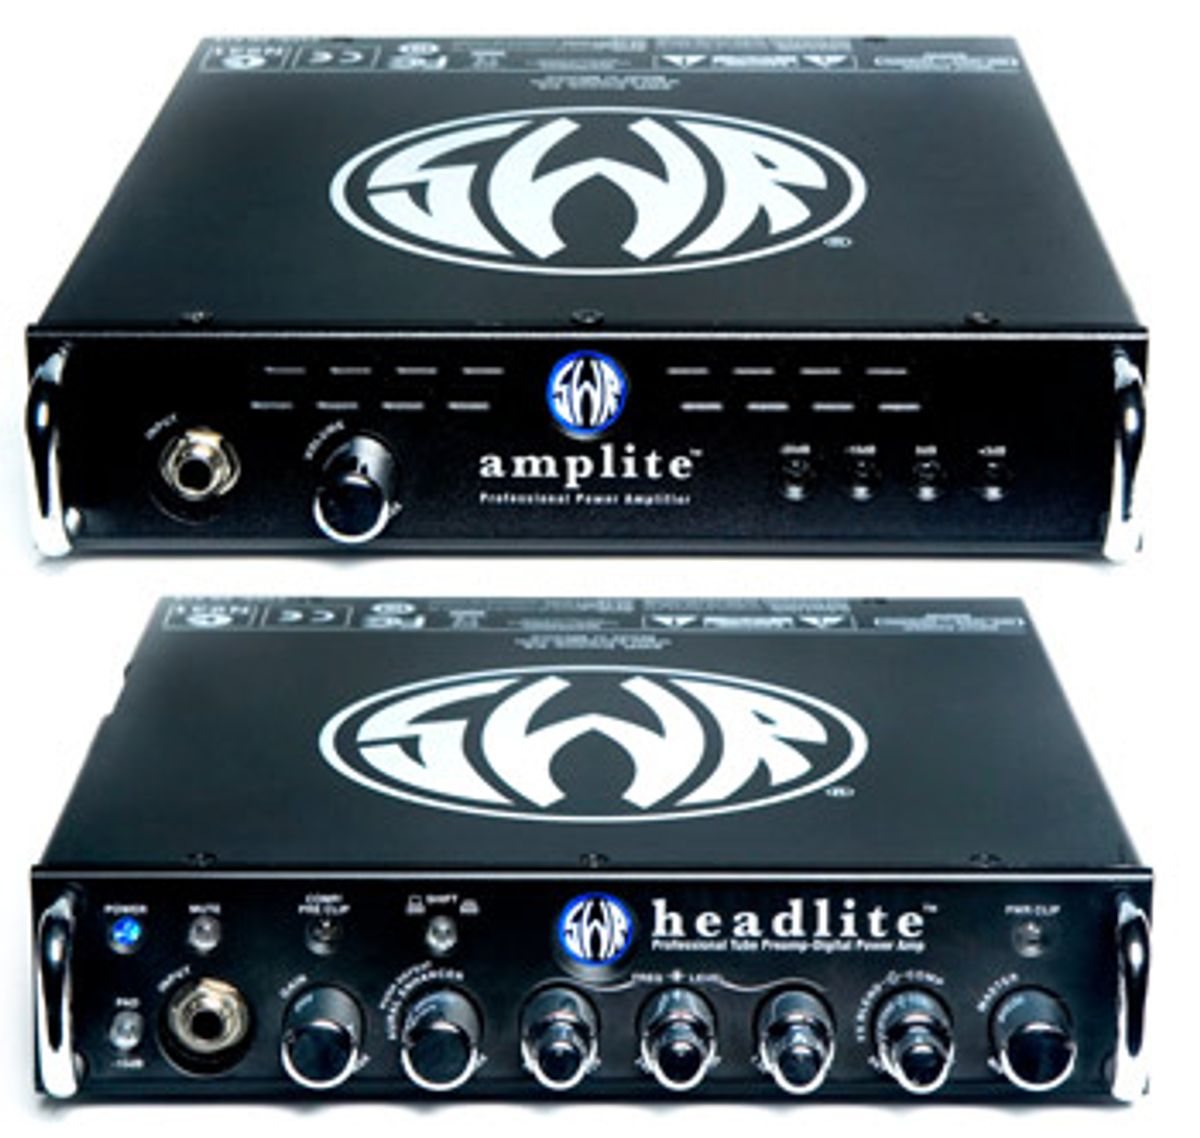 SWR Debuts Headlite and Amplite Bass Amps